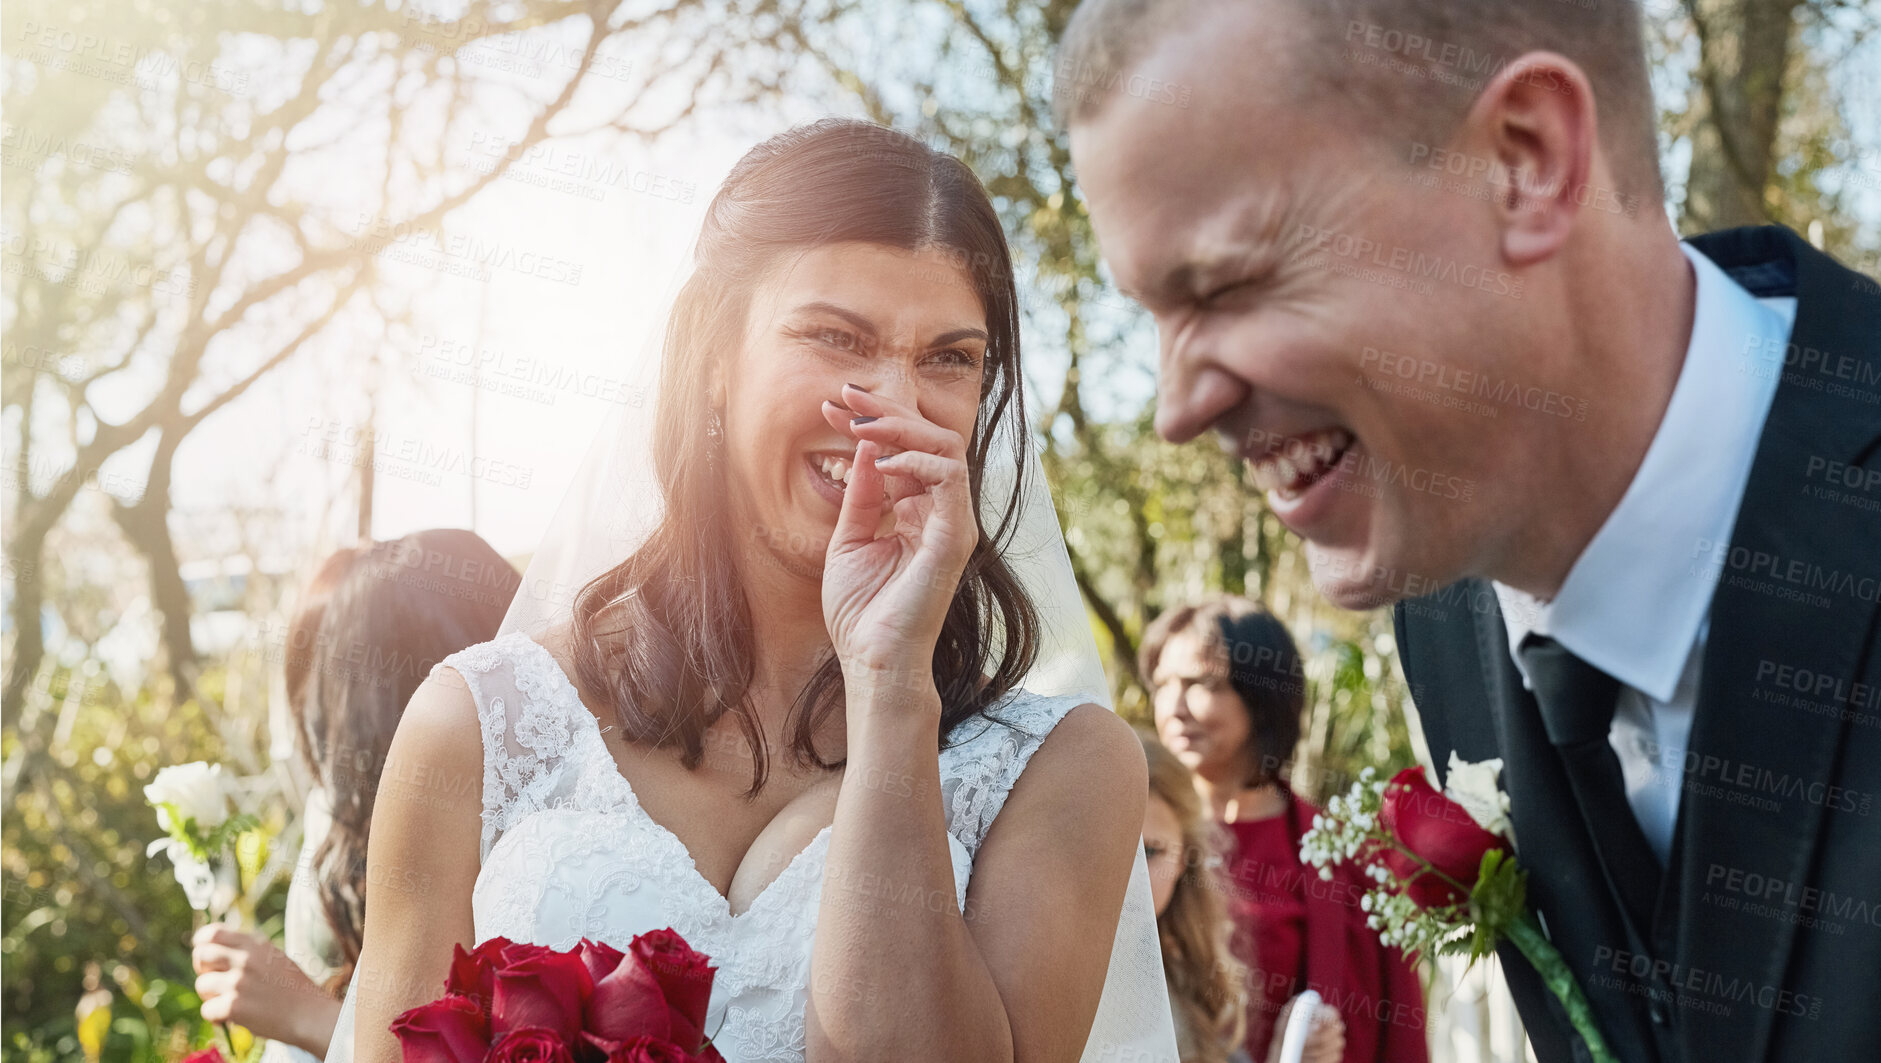 Buy stock photo Outdoor, funny and bride with groom, wedding day and happiness with romance, flowers and sunshine. People, garden and man with woman, laughing and cheerful with joke, relationship and humor with joy